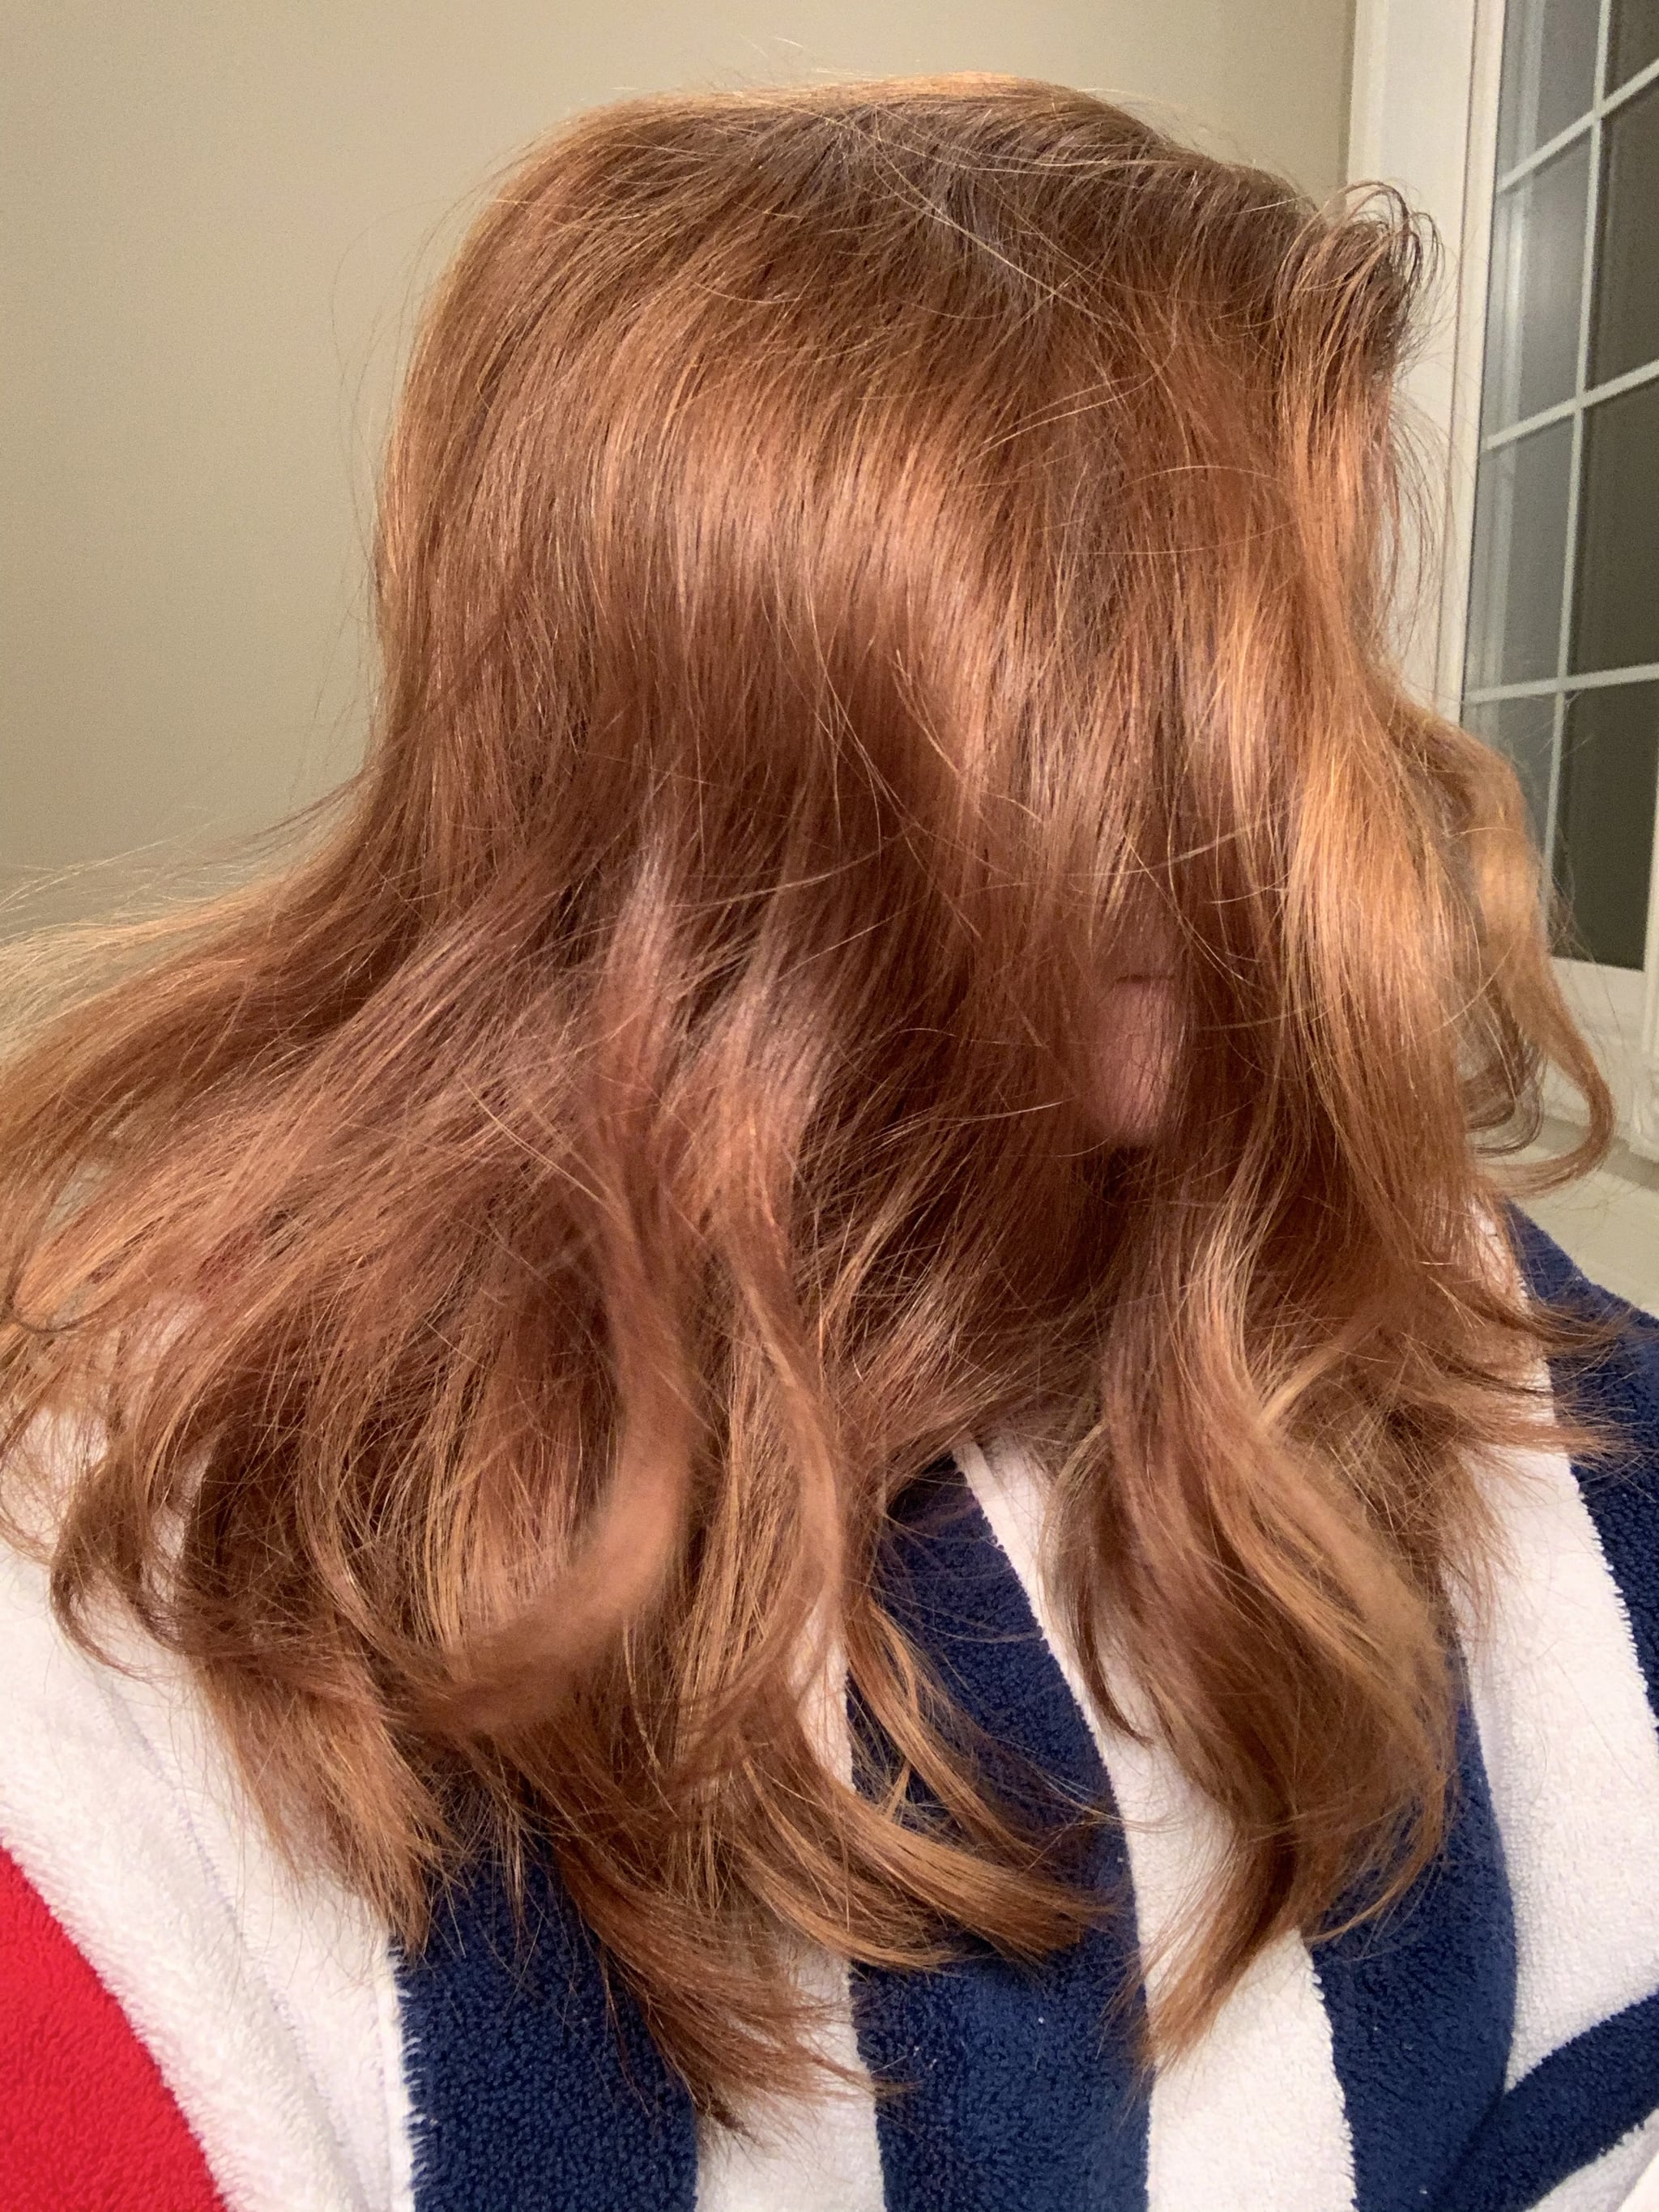 KMS Style Color Spray On Hair Dye Review With Pictures | POPSUGAR Beauty